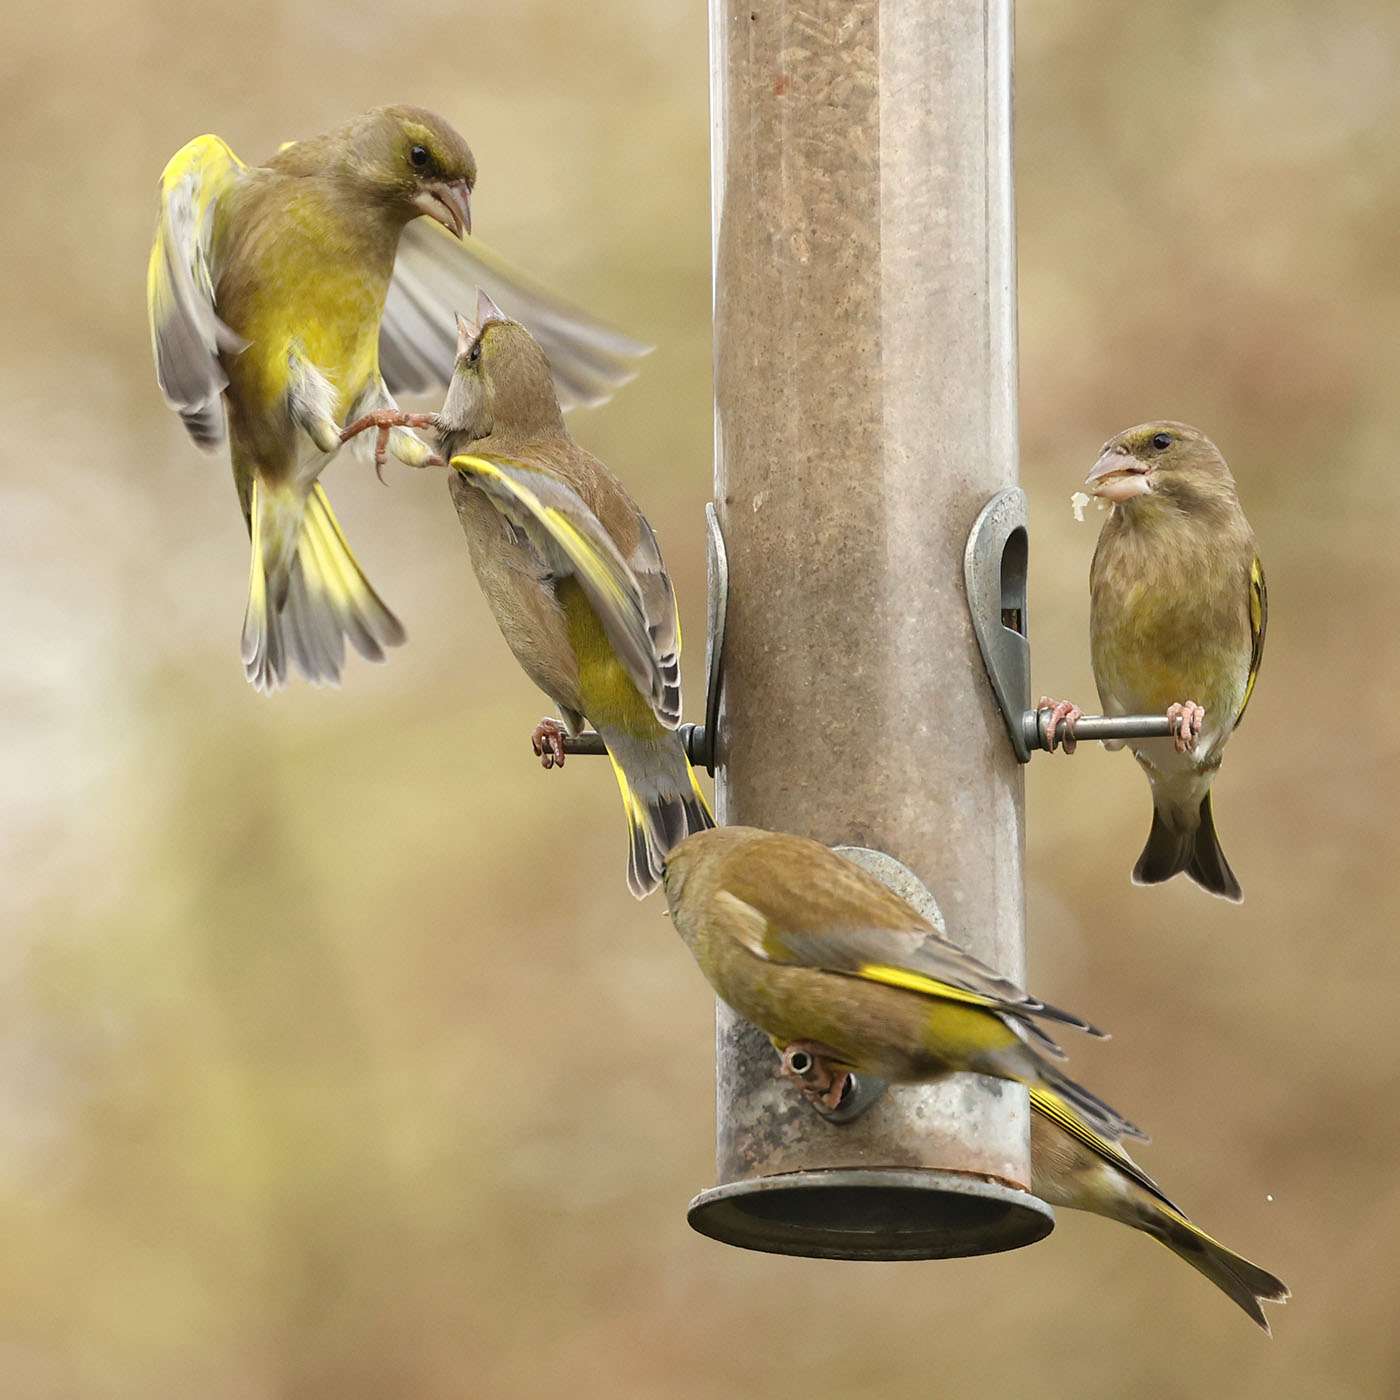 Greenfinch by Steve Hopper at South Brent